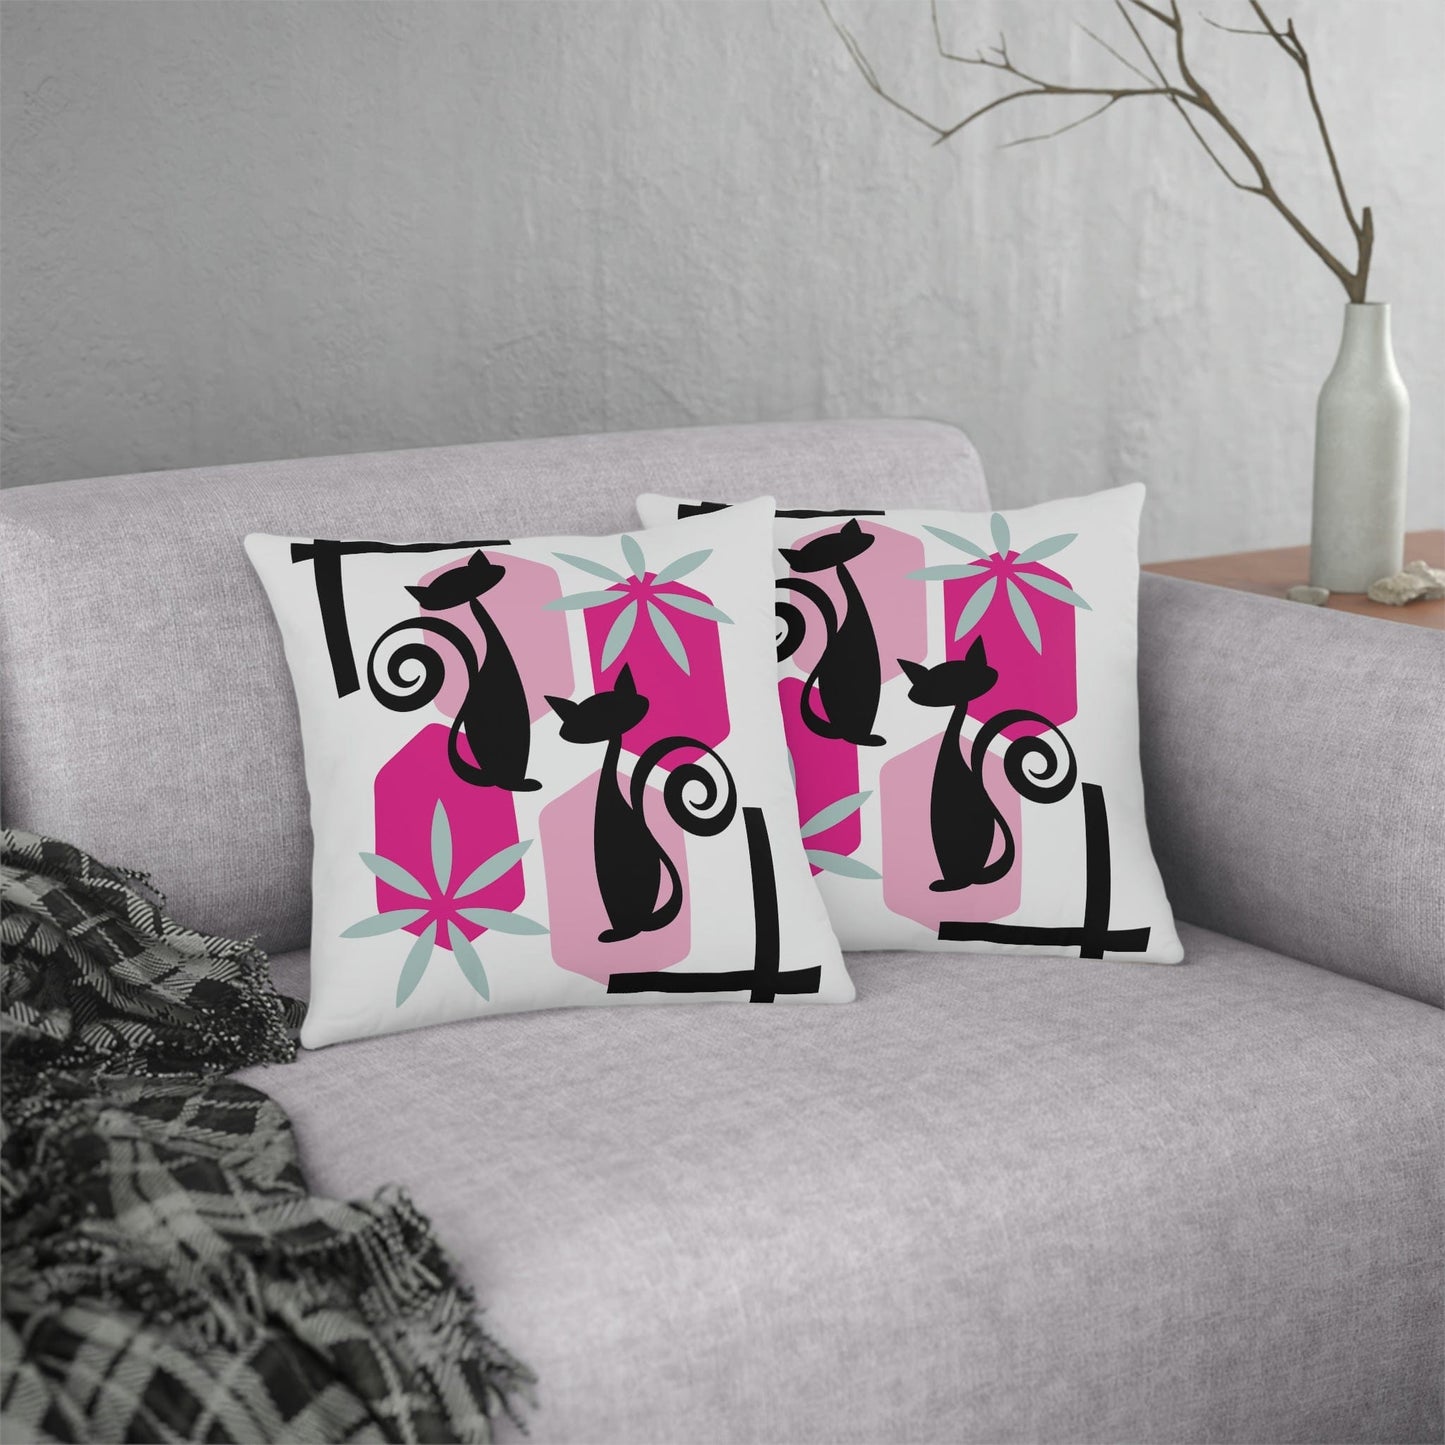 Kate McEnroe New York Outdoor Throw Pillow in Mid Century Modern Atomic Cat Print Outdoor Pillows